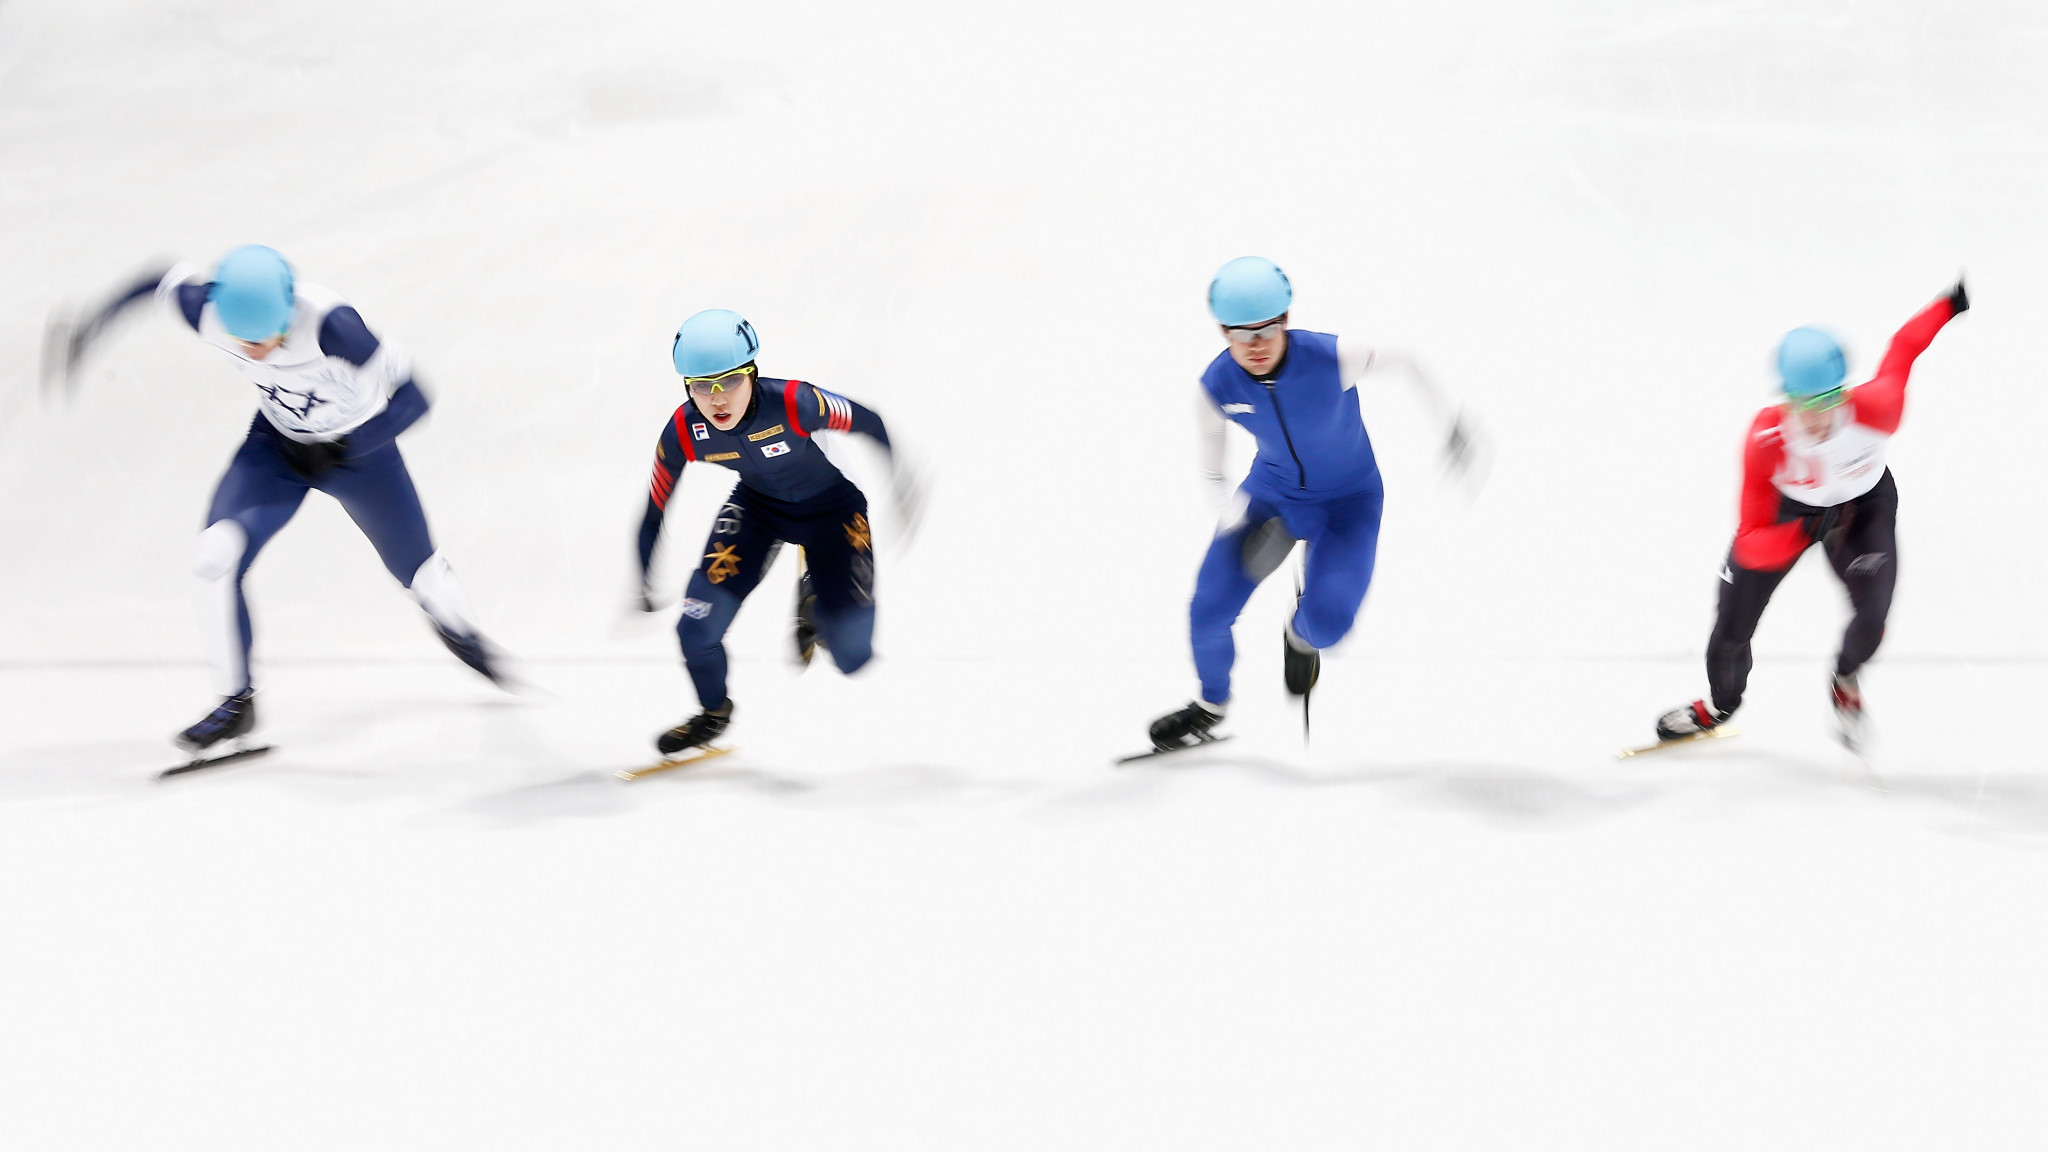 Park wraps up overall 1,000m title at ISU Short Track World Cup